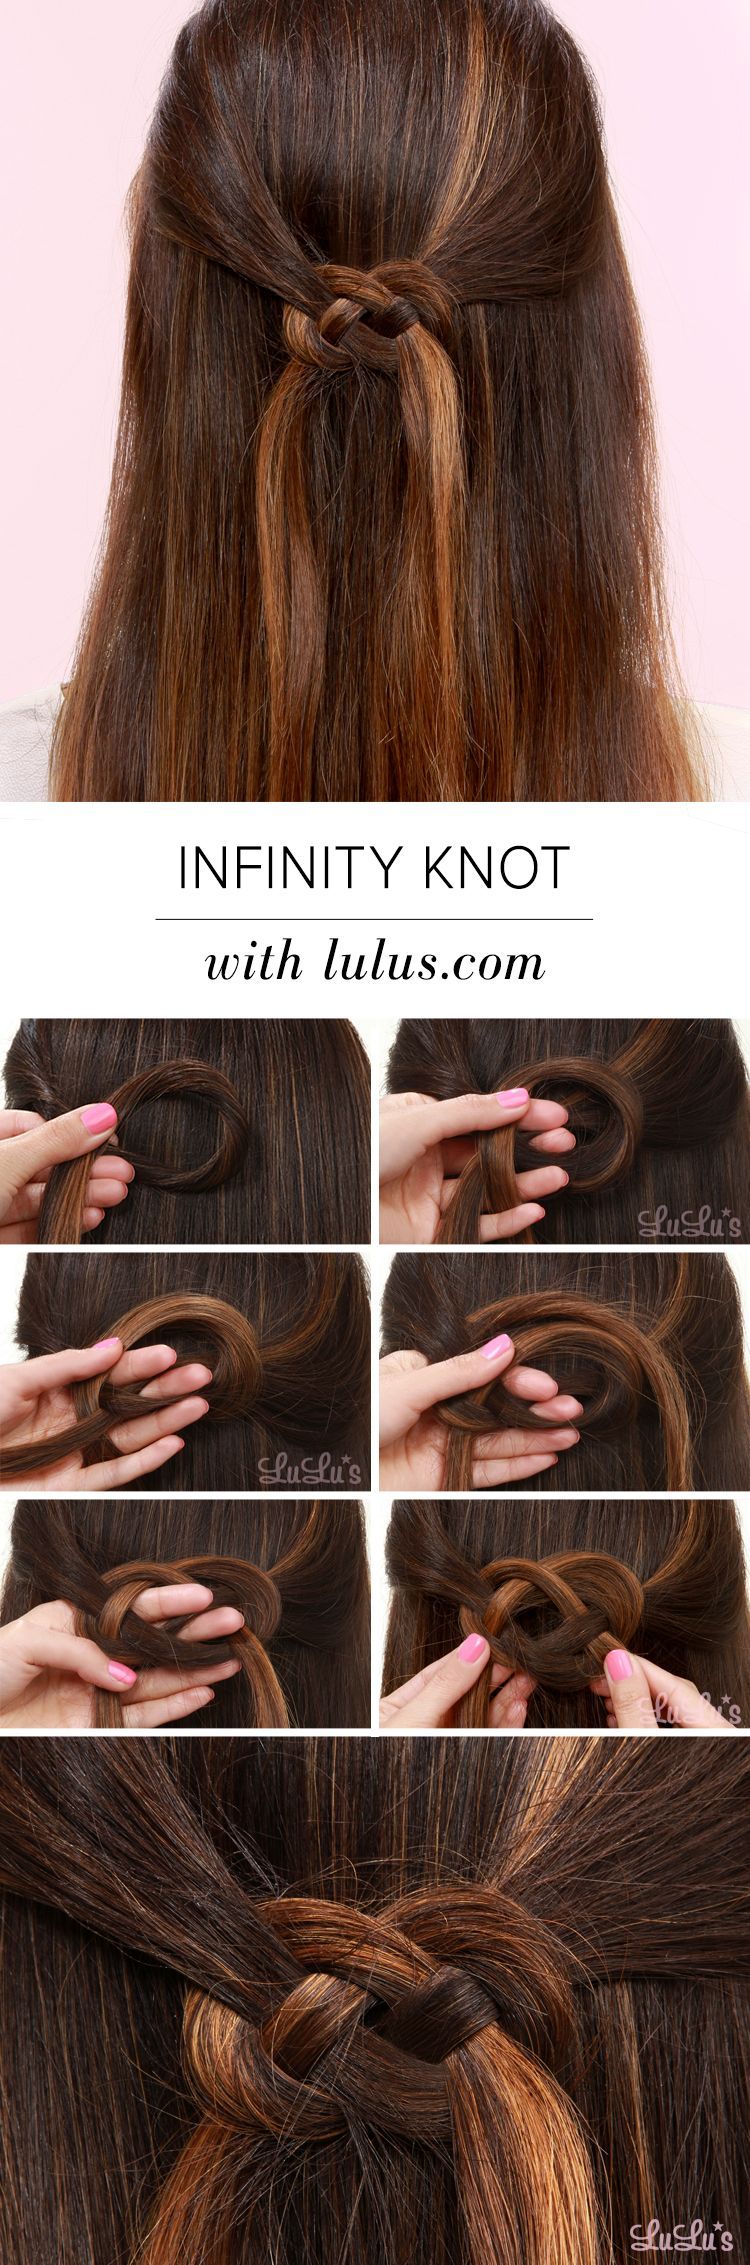 You’ll want to wear our Infinity Knot Hair Tutorial for ever and ever! Grab your best gal pal and check out the full tutorial on